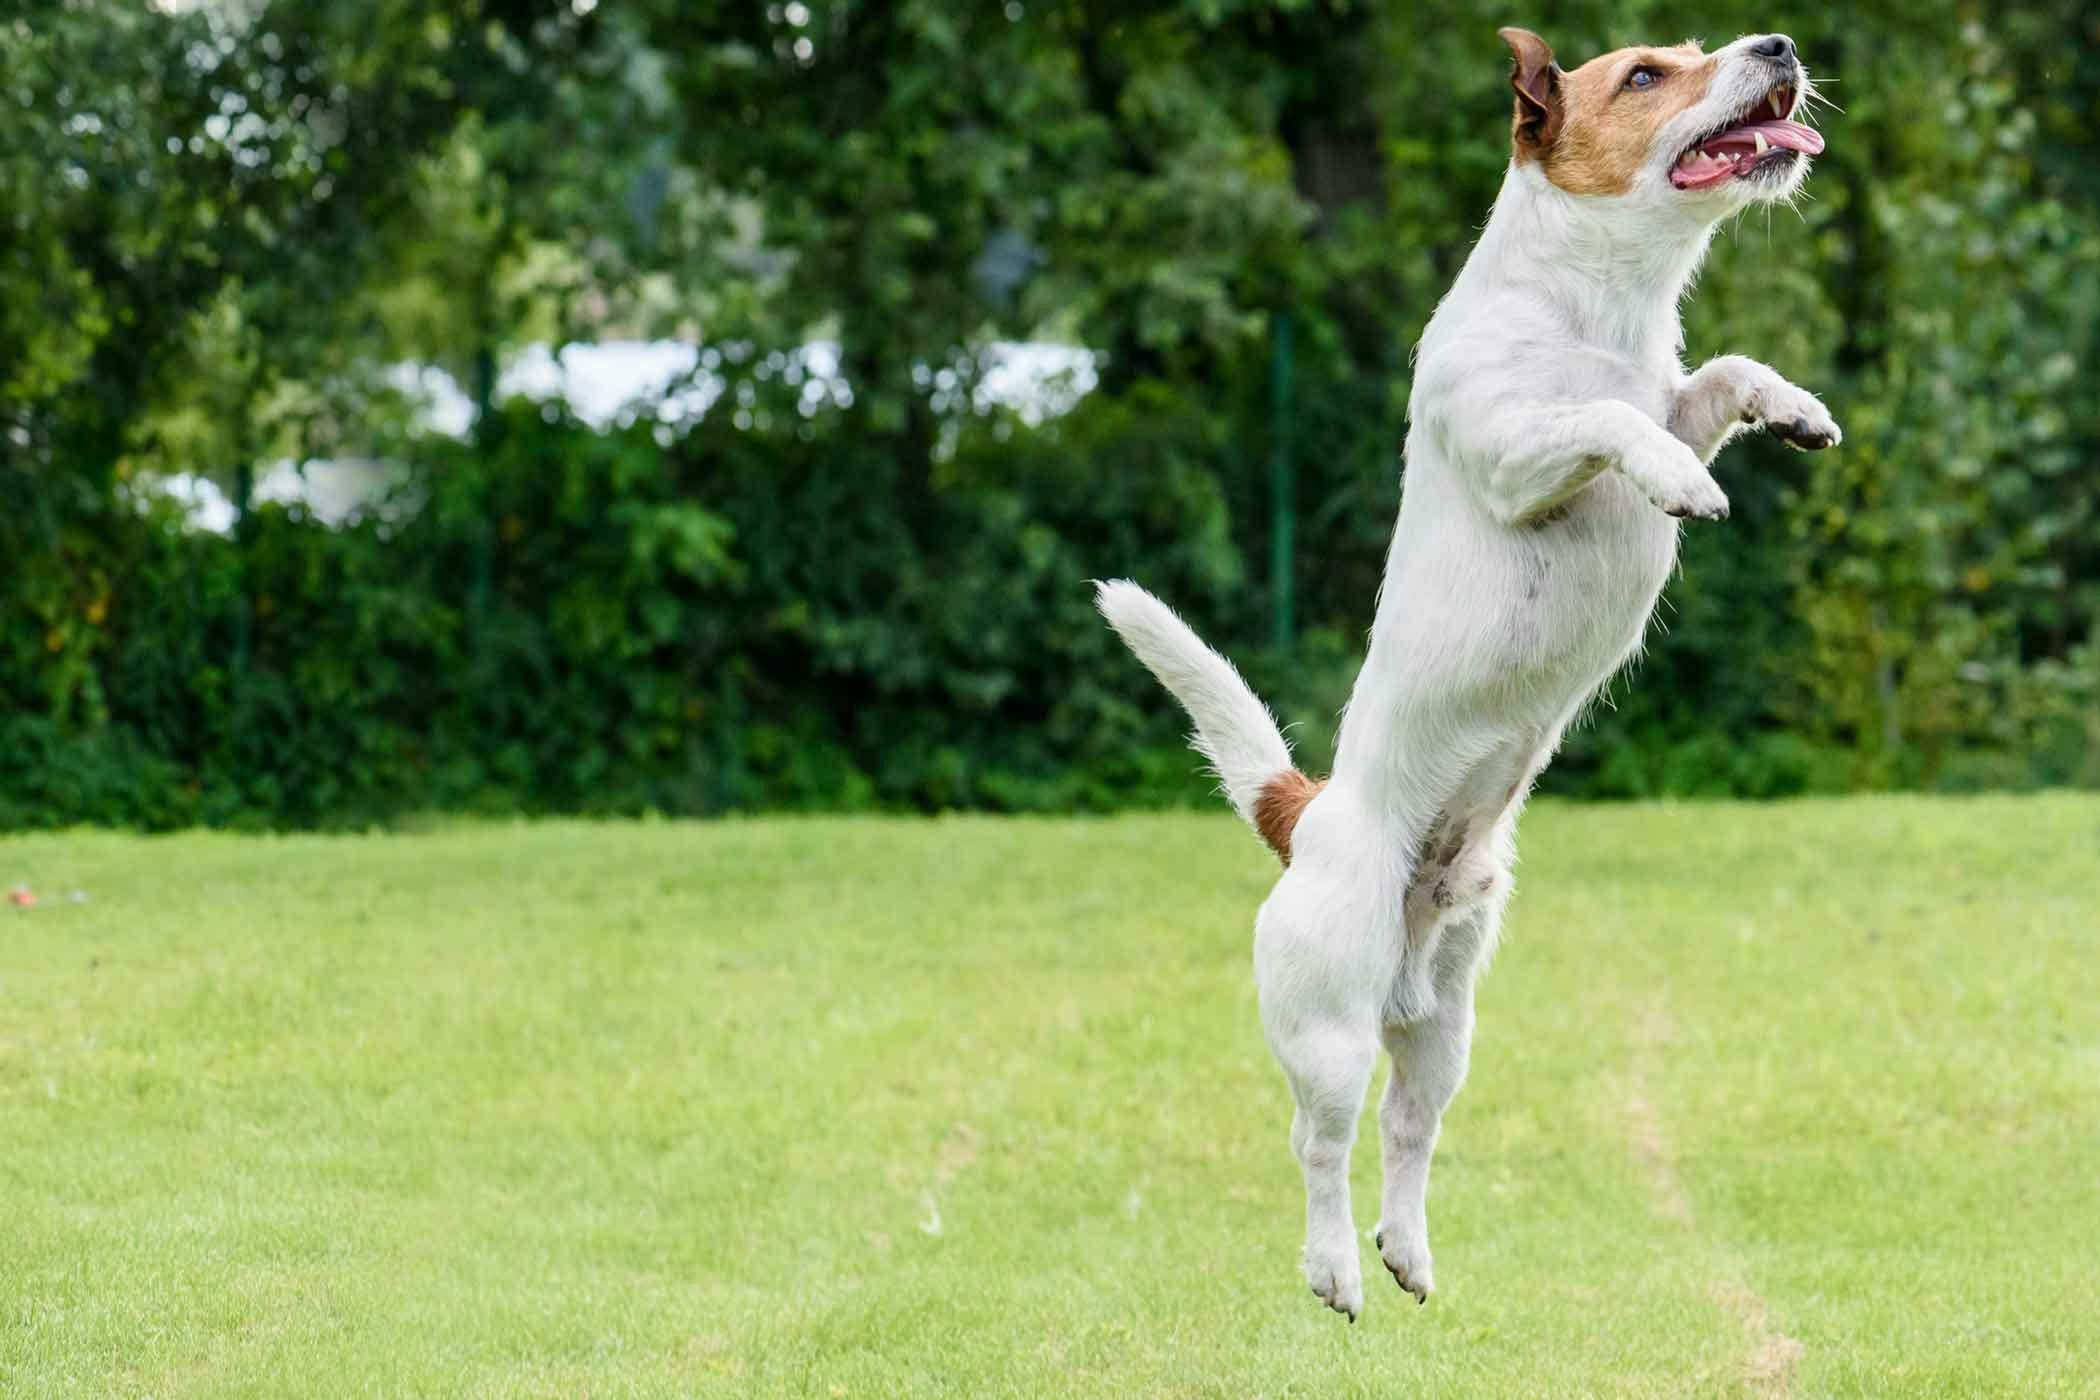 How to Train Your Dog to Jump Up | Wag!